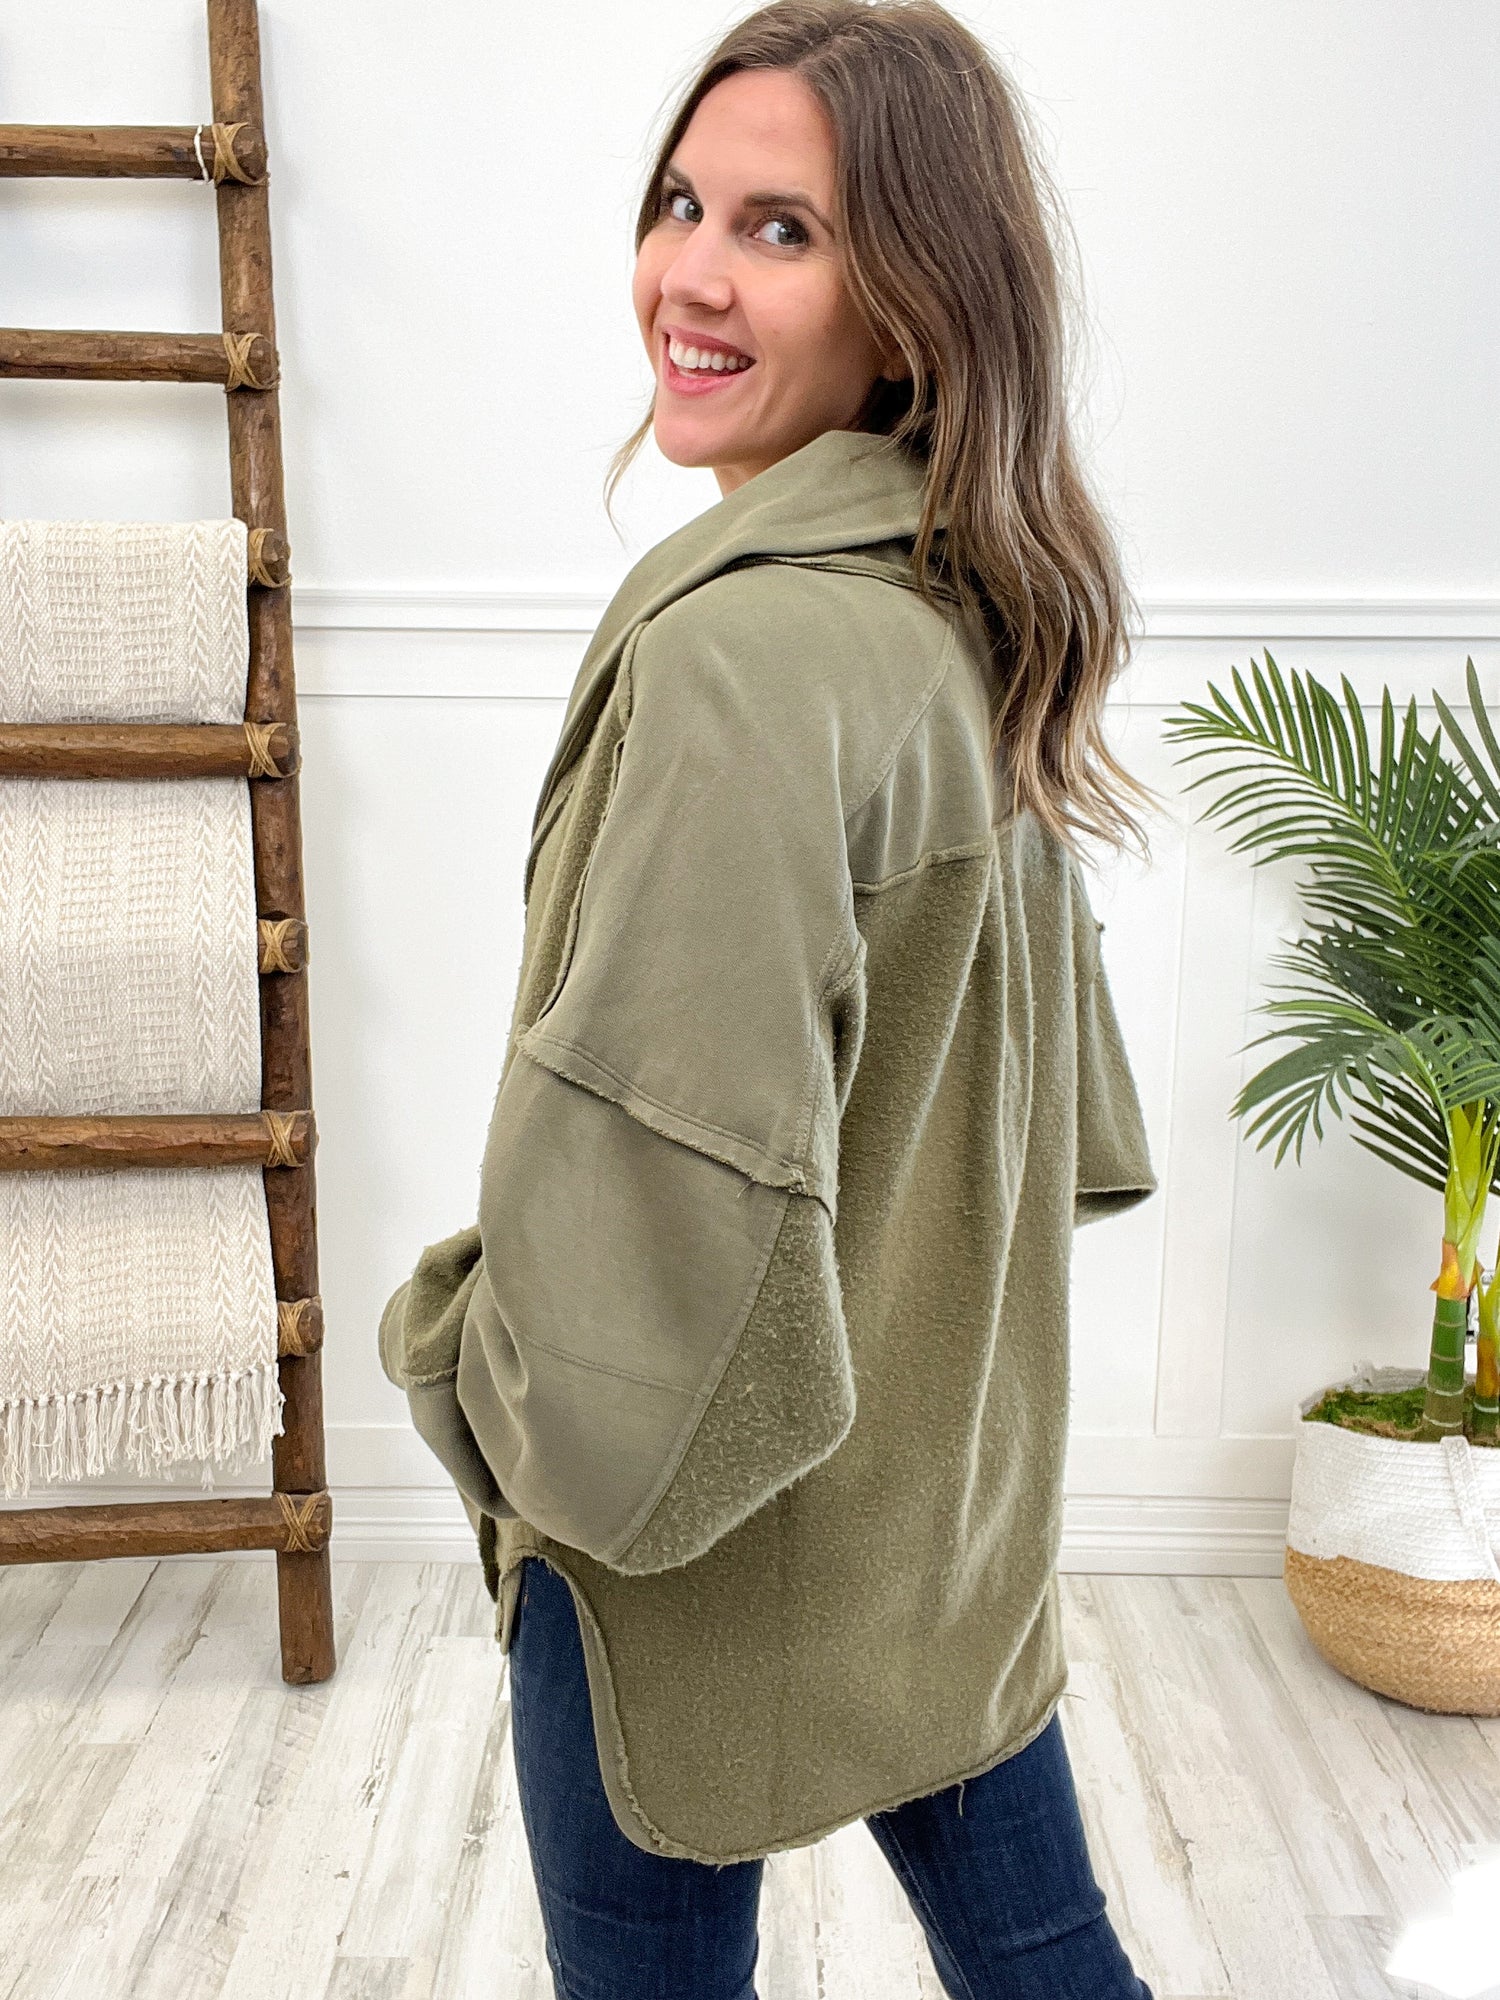 Mineral Wash Jacket with Pockets